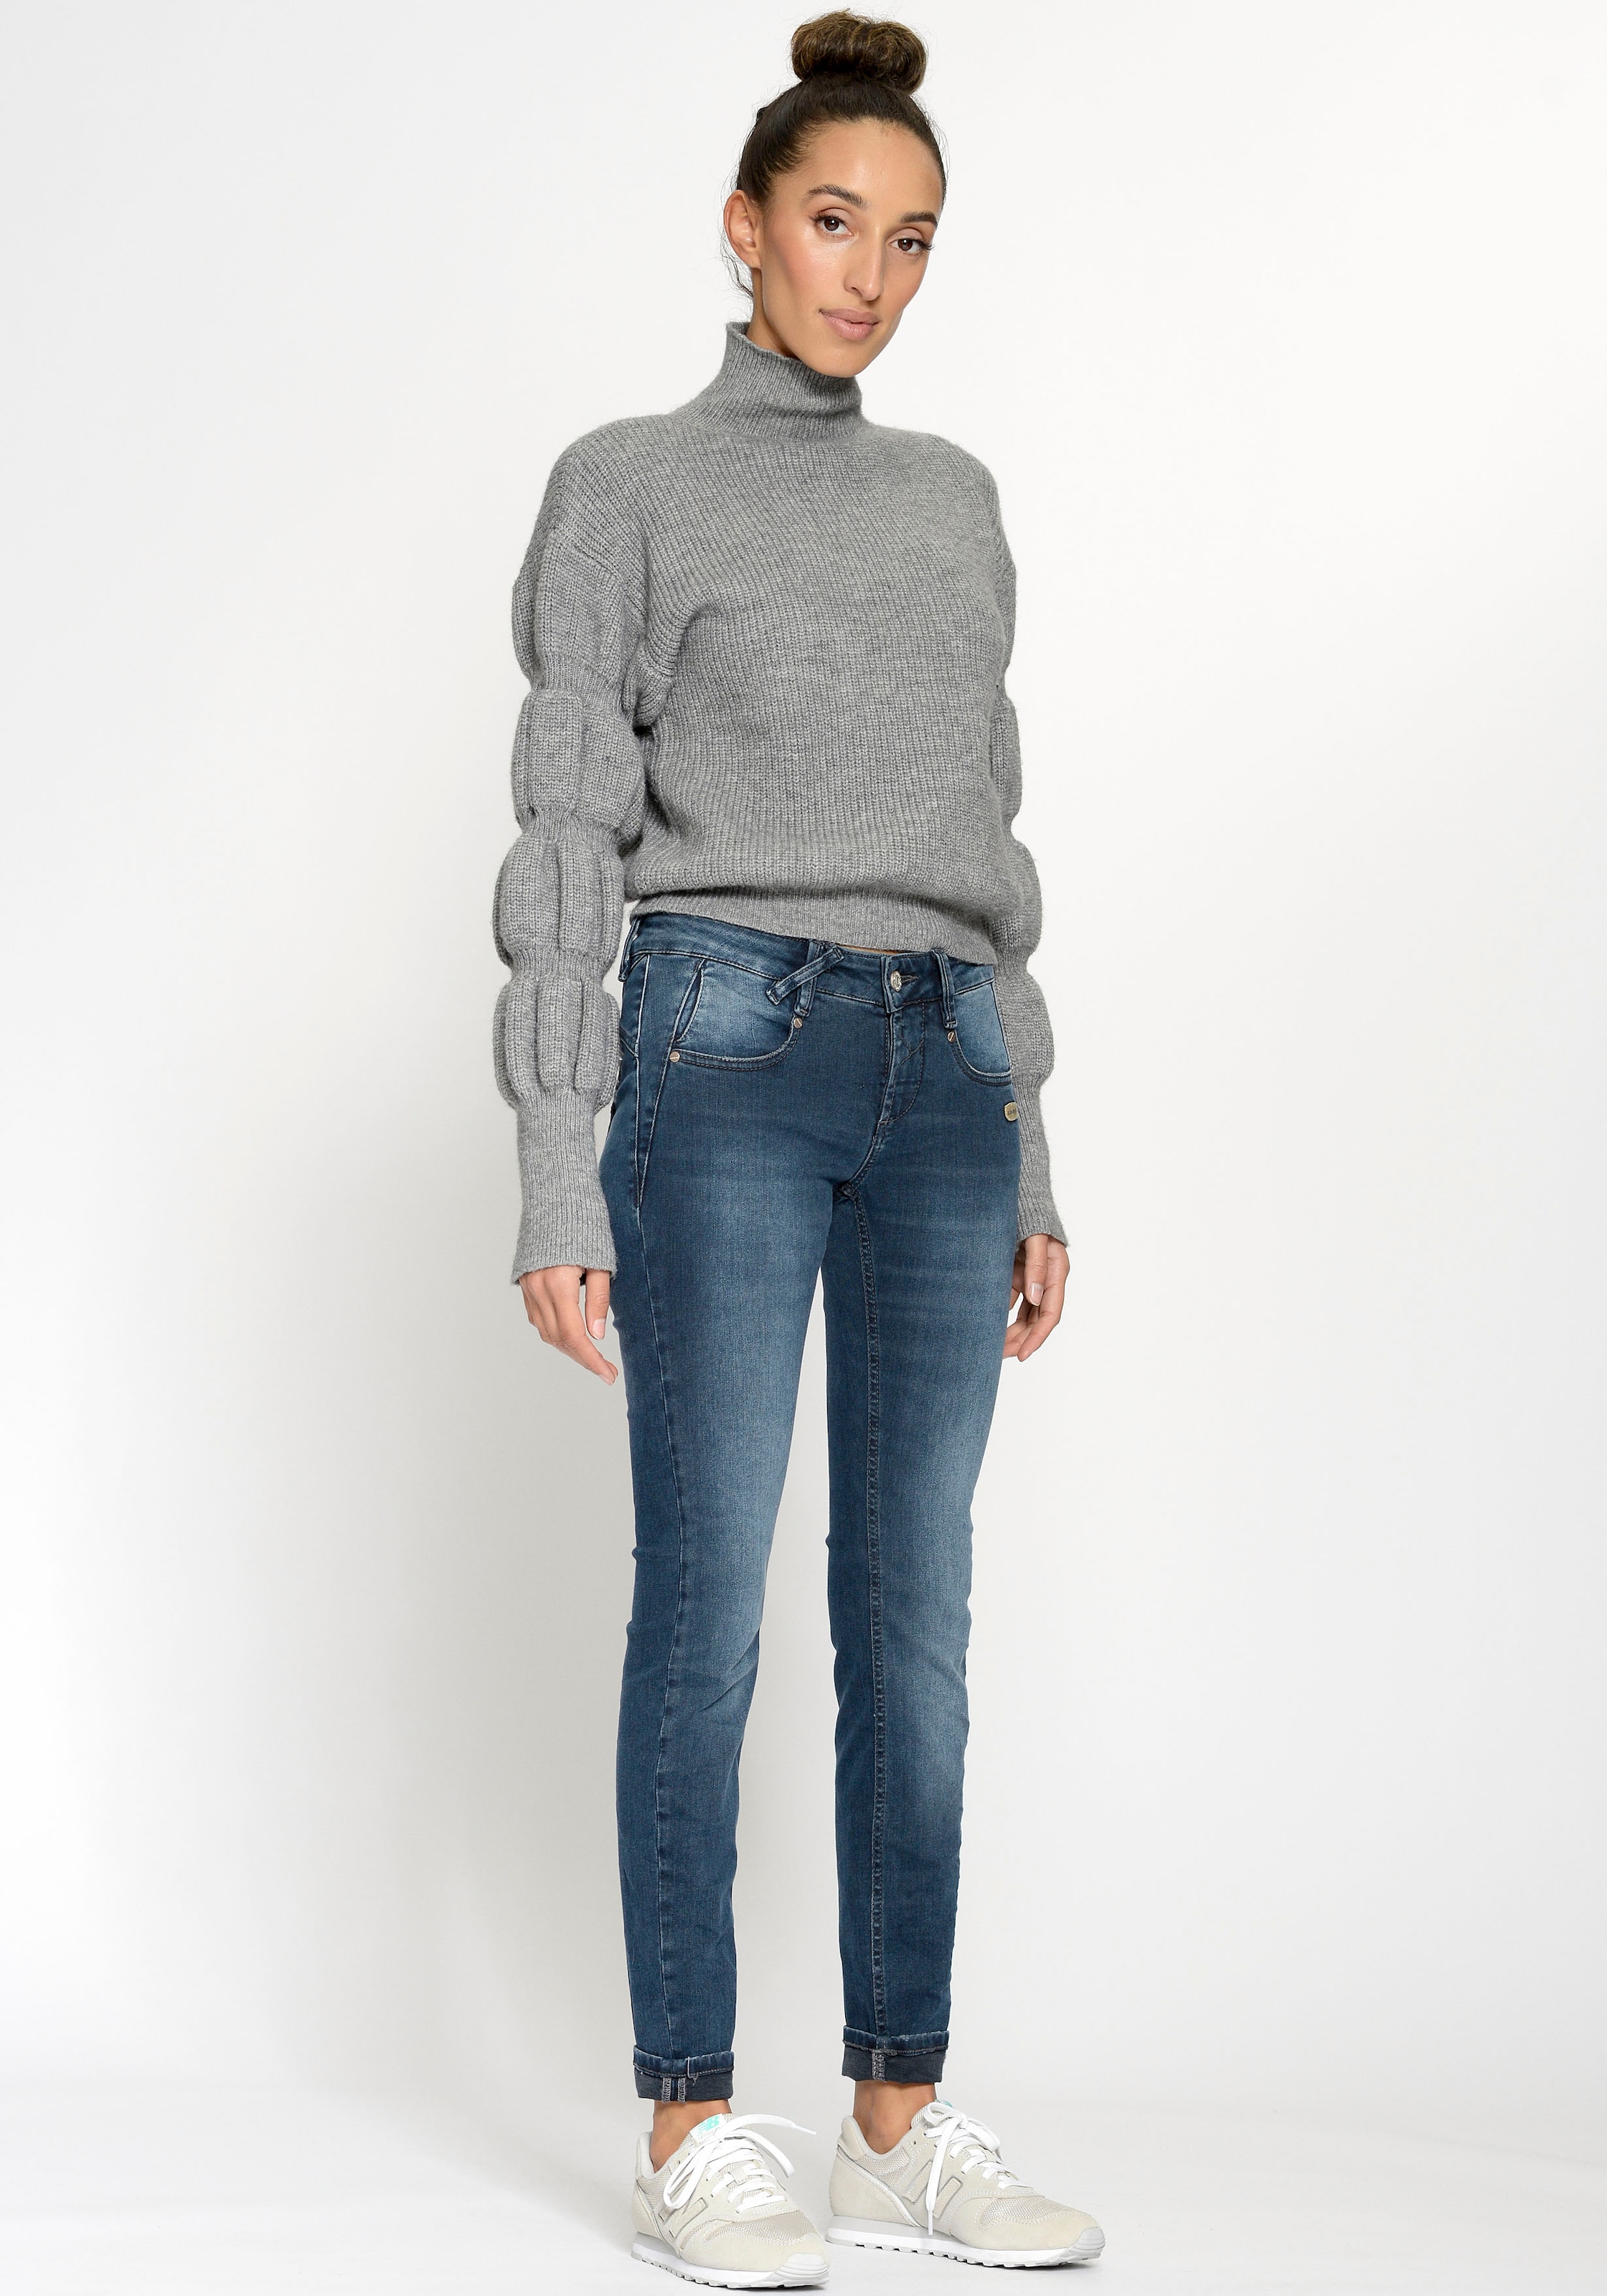 »94 Skinny-fit-Jeans online OTTO Nele« bei GANG